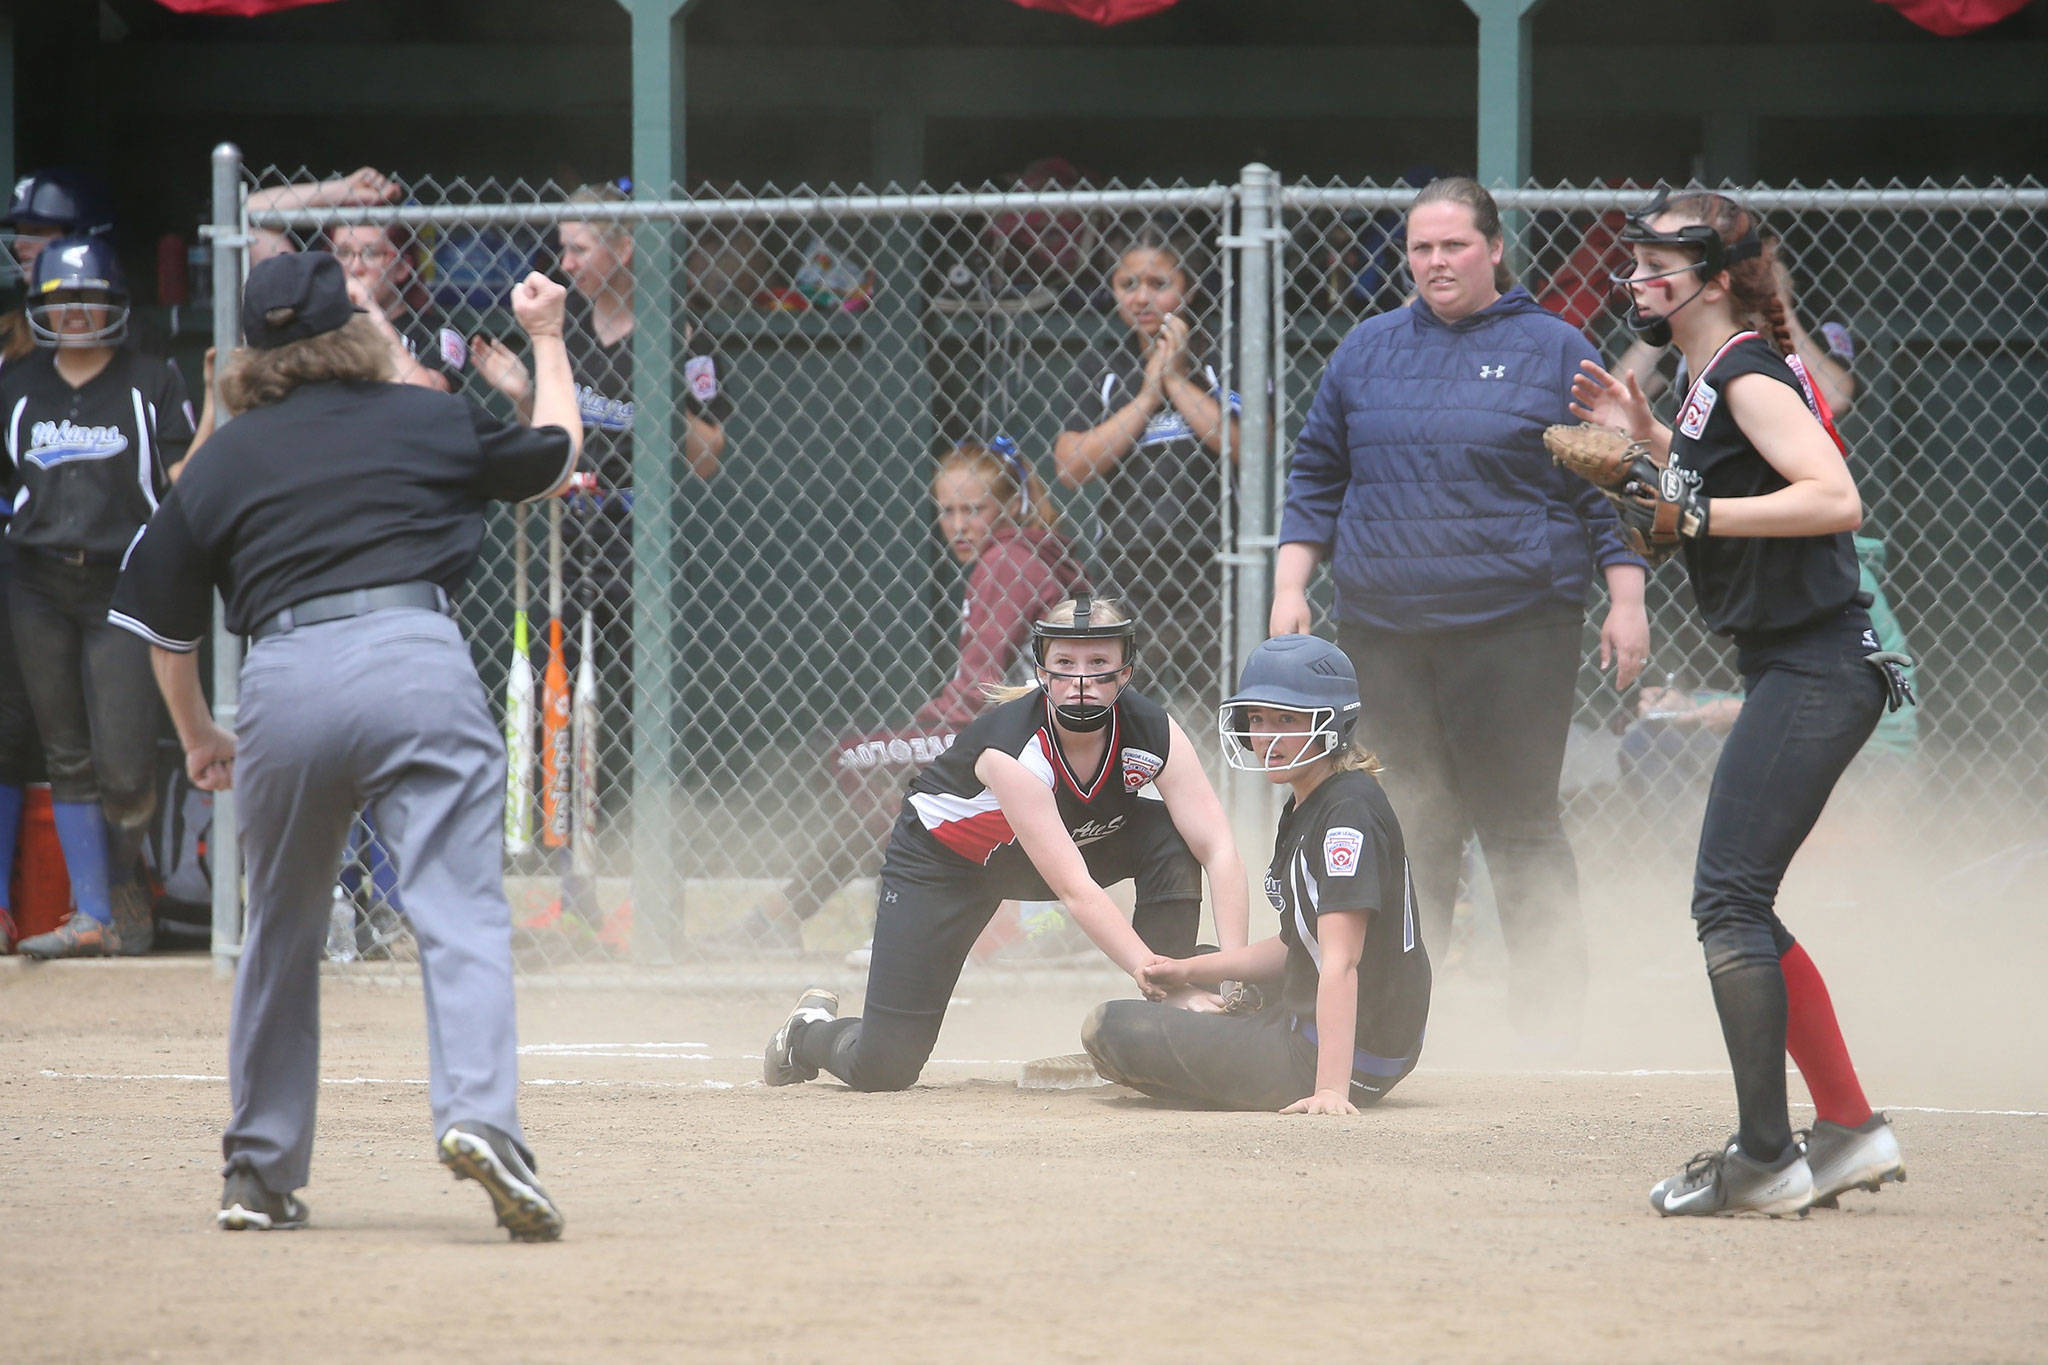 Umpire Rita Cline calls out an Orcas Island runner at third base as Audrianna Shaw applies the tag and Coral Caveness looks on. (Photo by John Fisken)